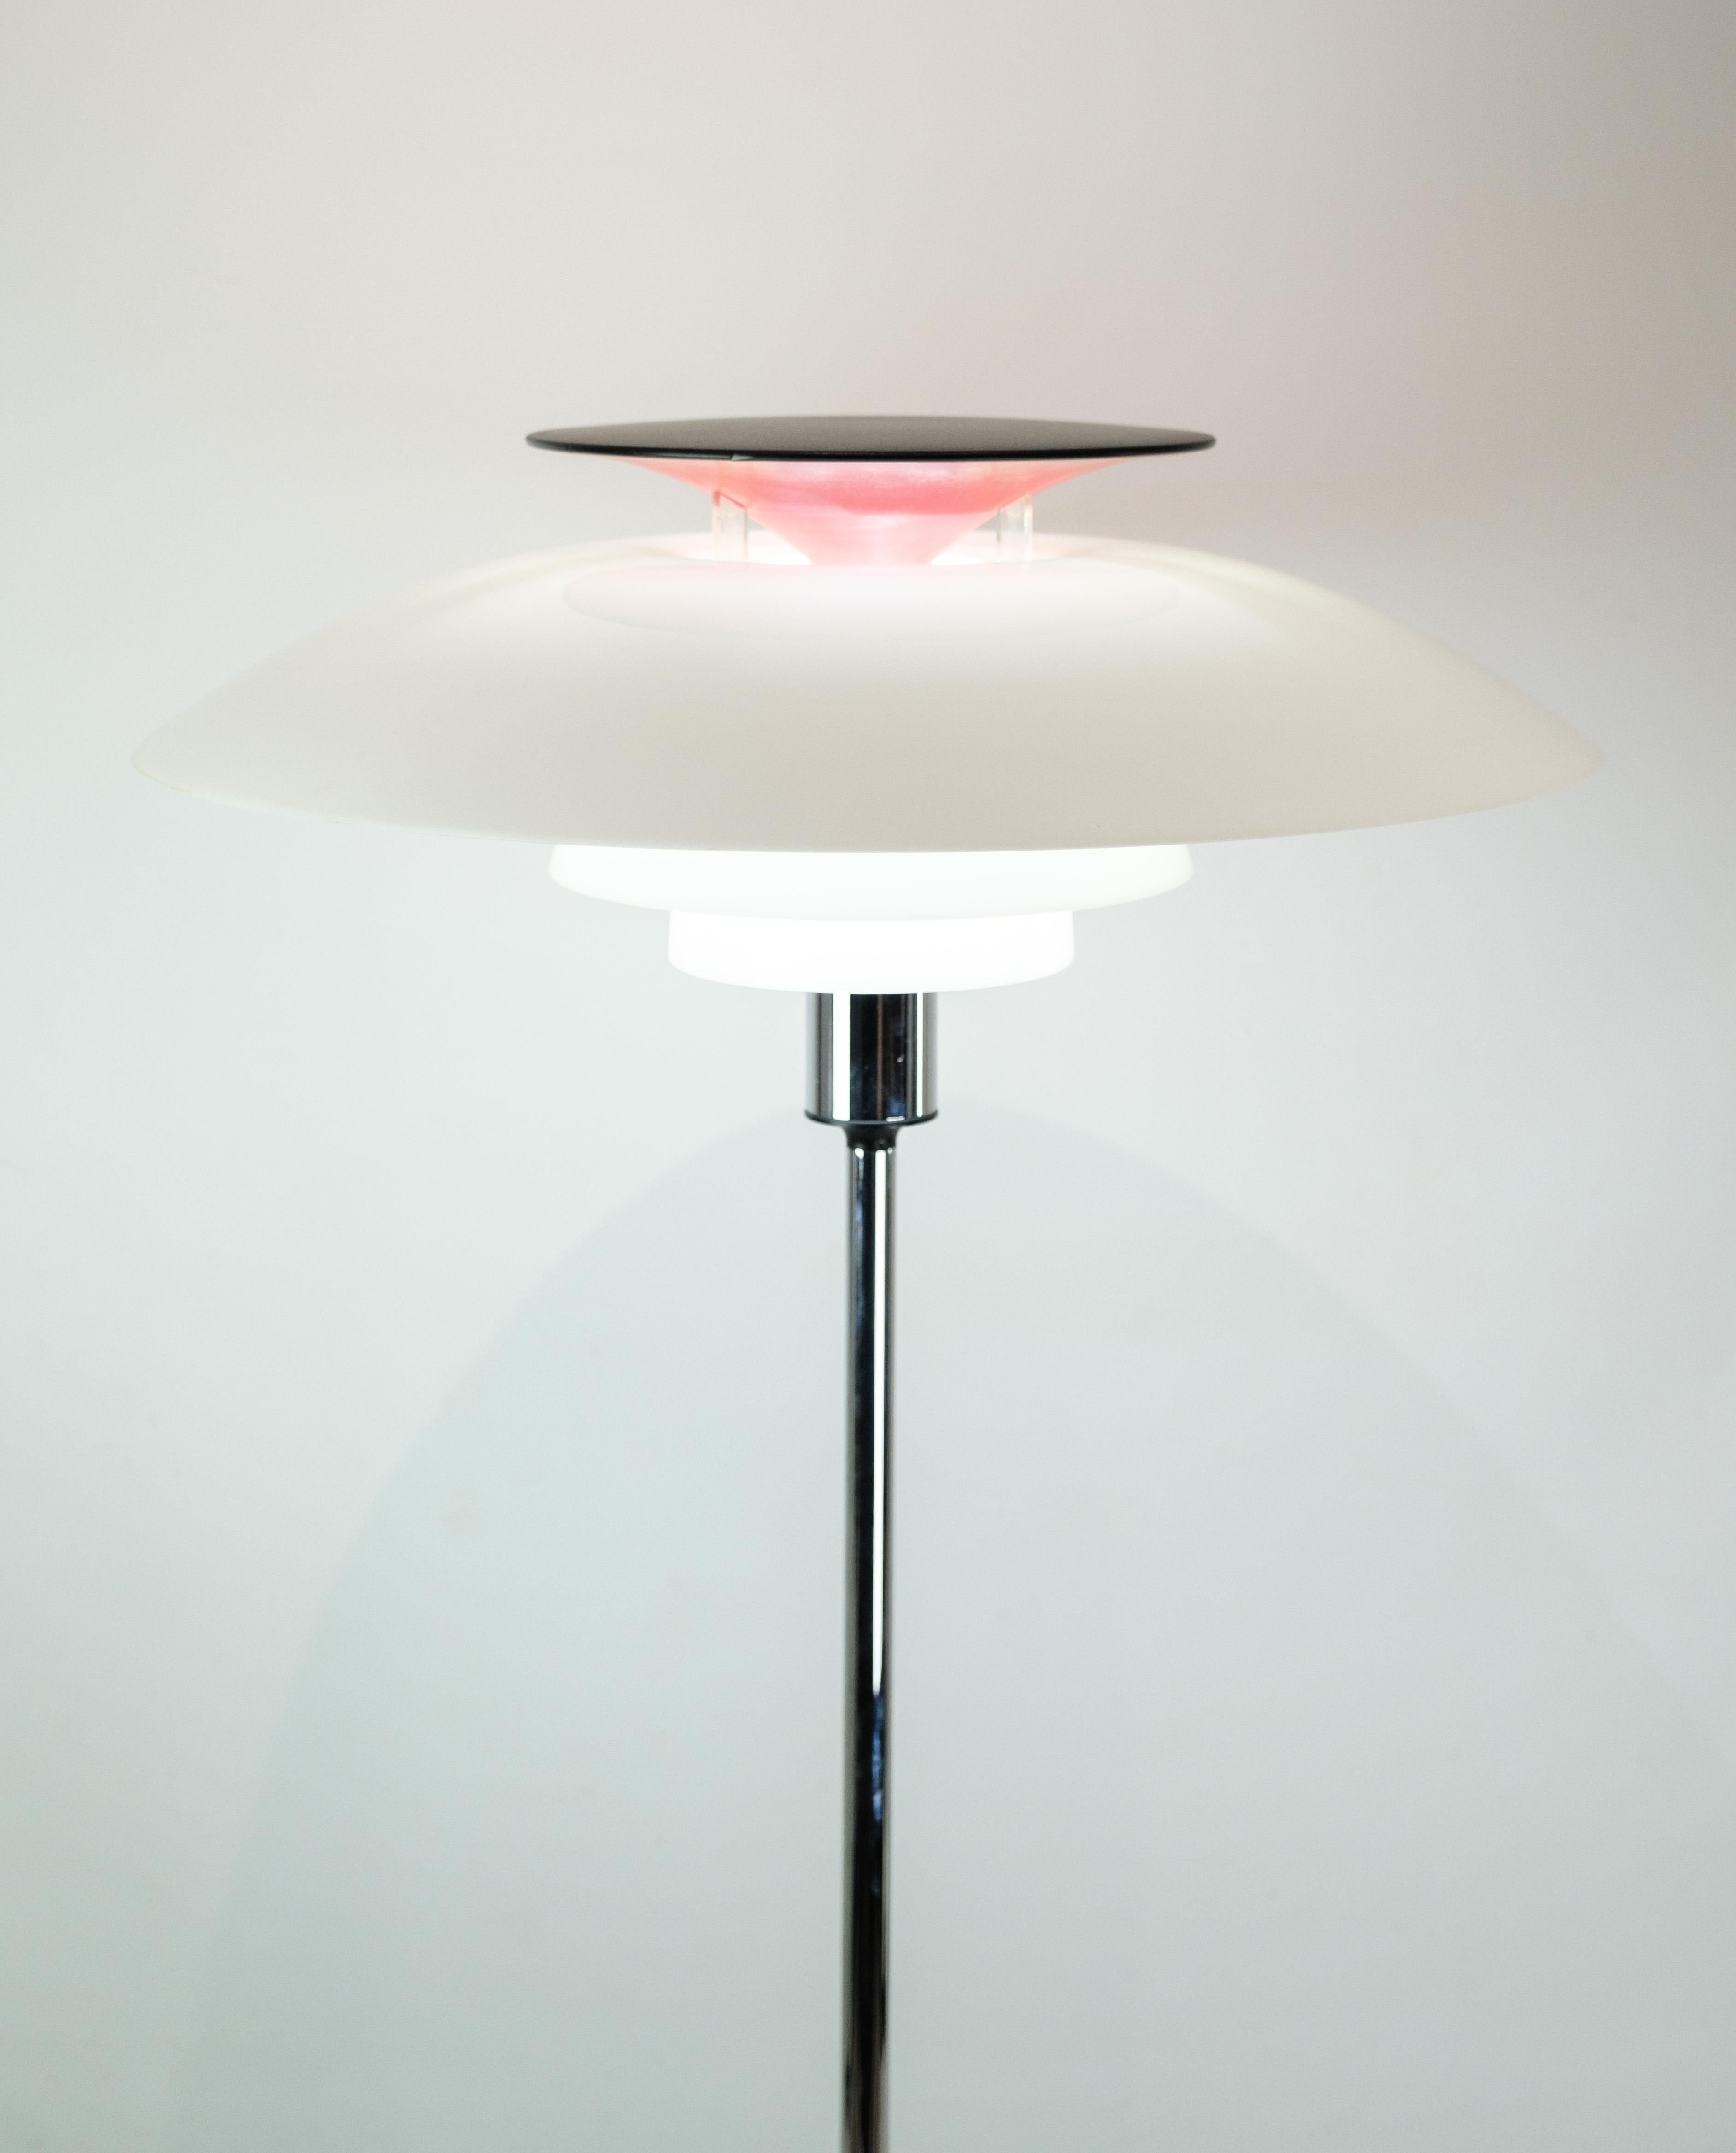 Mid-Century Modern PH Floor Lamp Model PH80 By Poul Henningsen Made By Louis Poulsen From 1974s For Sale